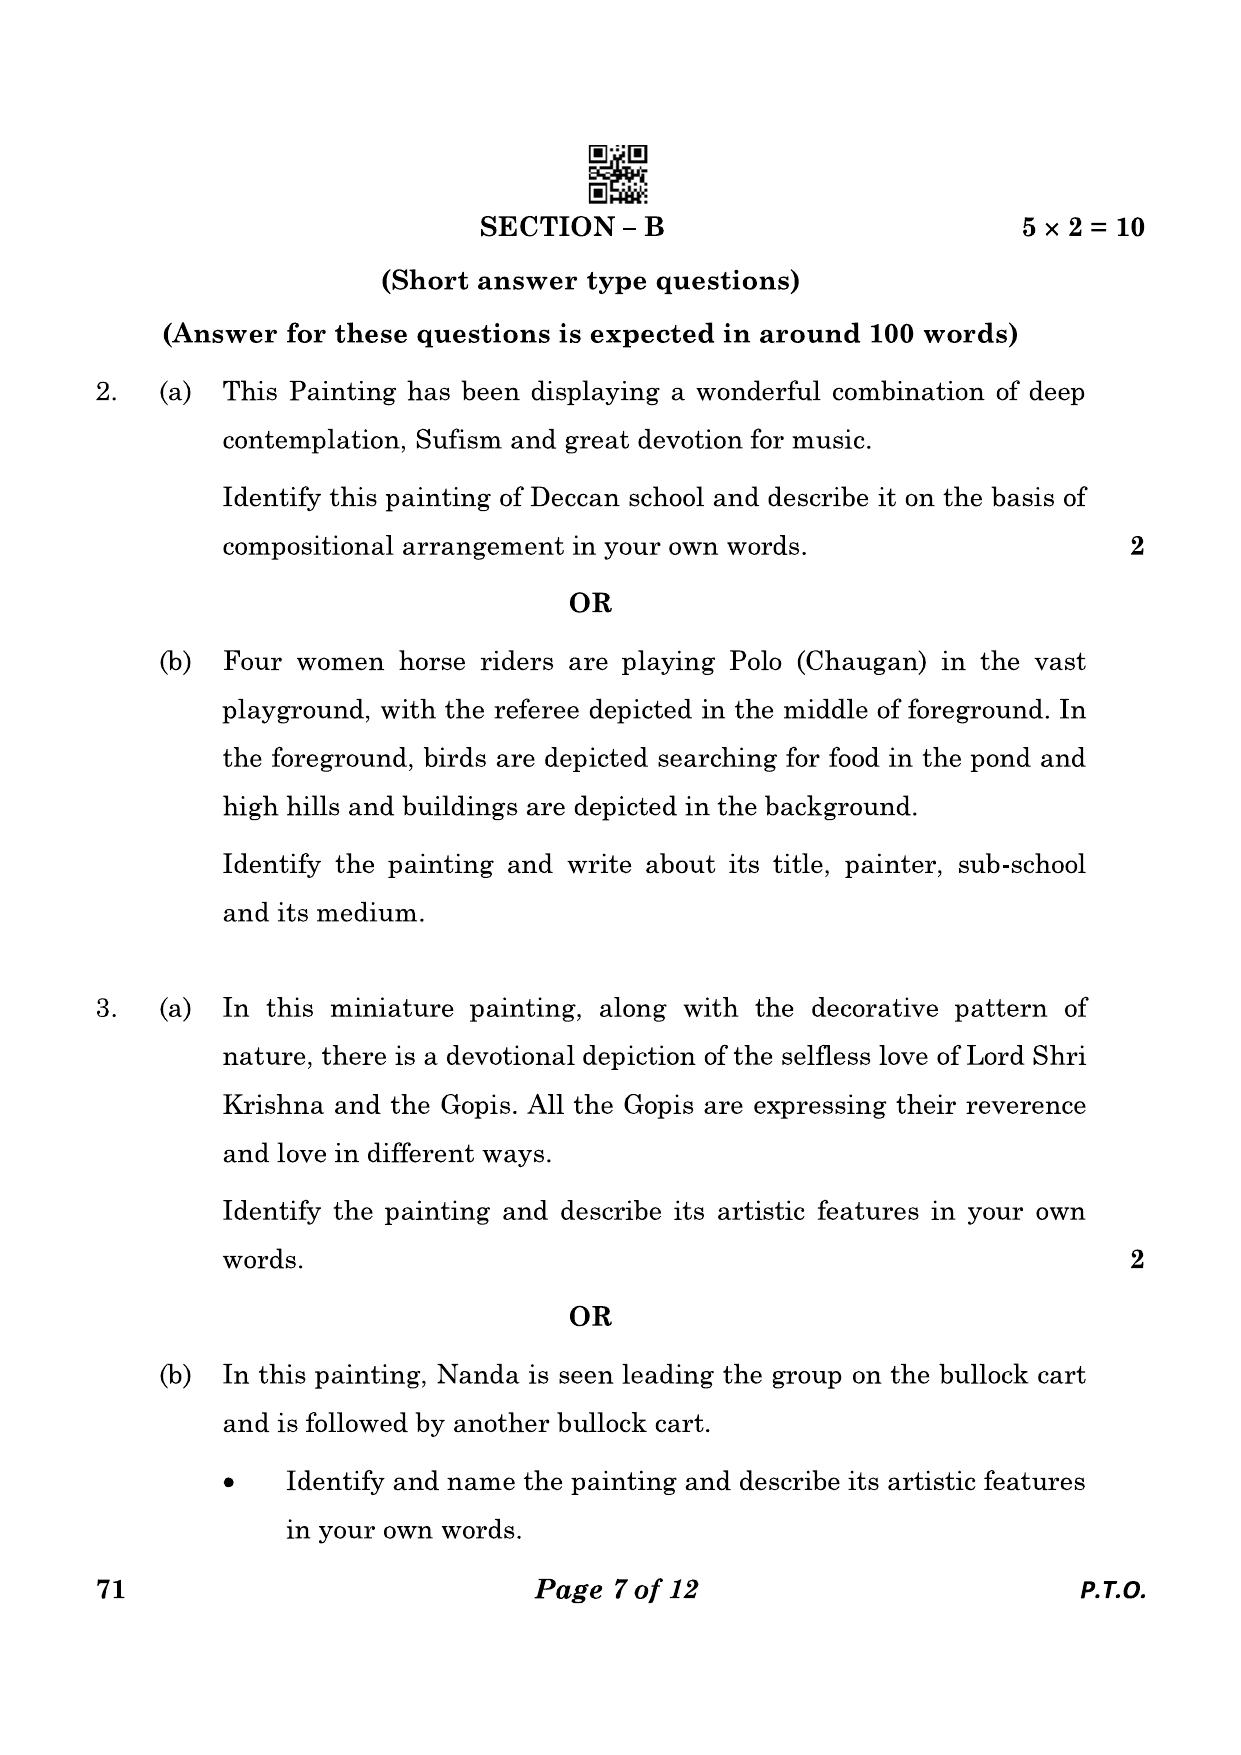 CBSE Class 12 71_Painting 2023 Question Paper - Page 7